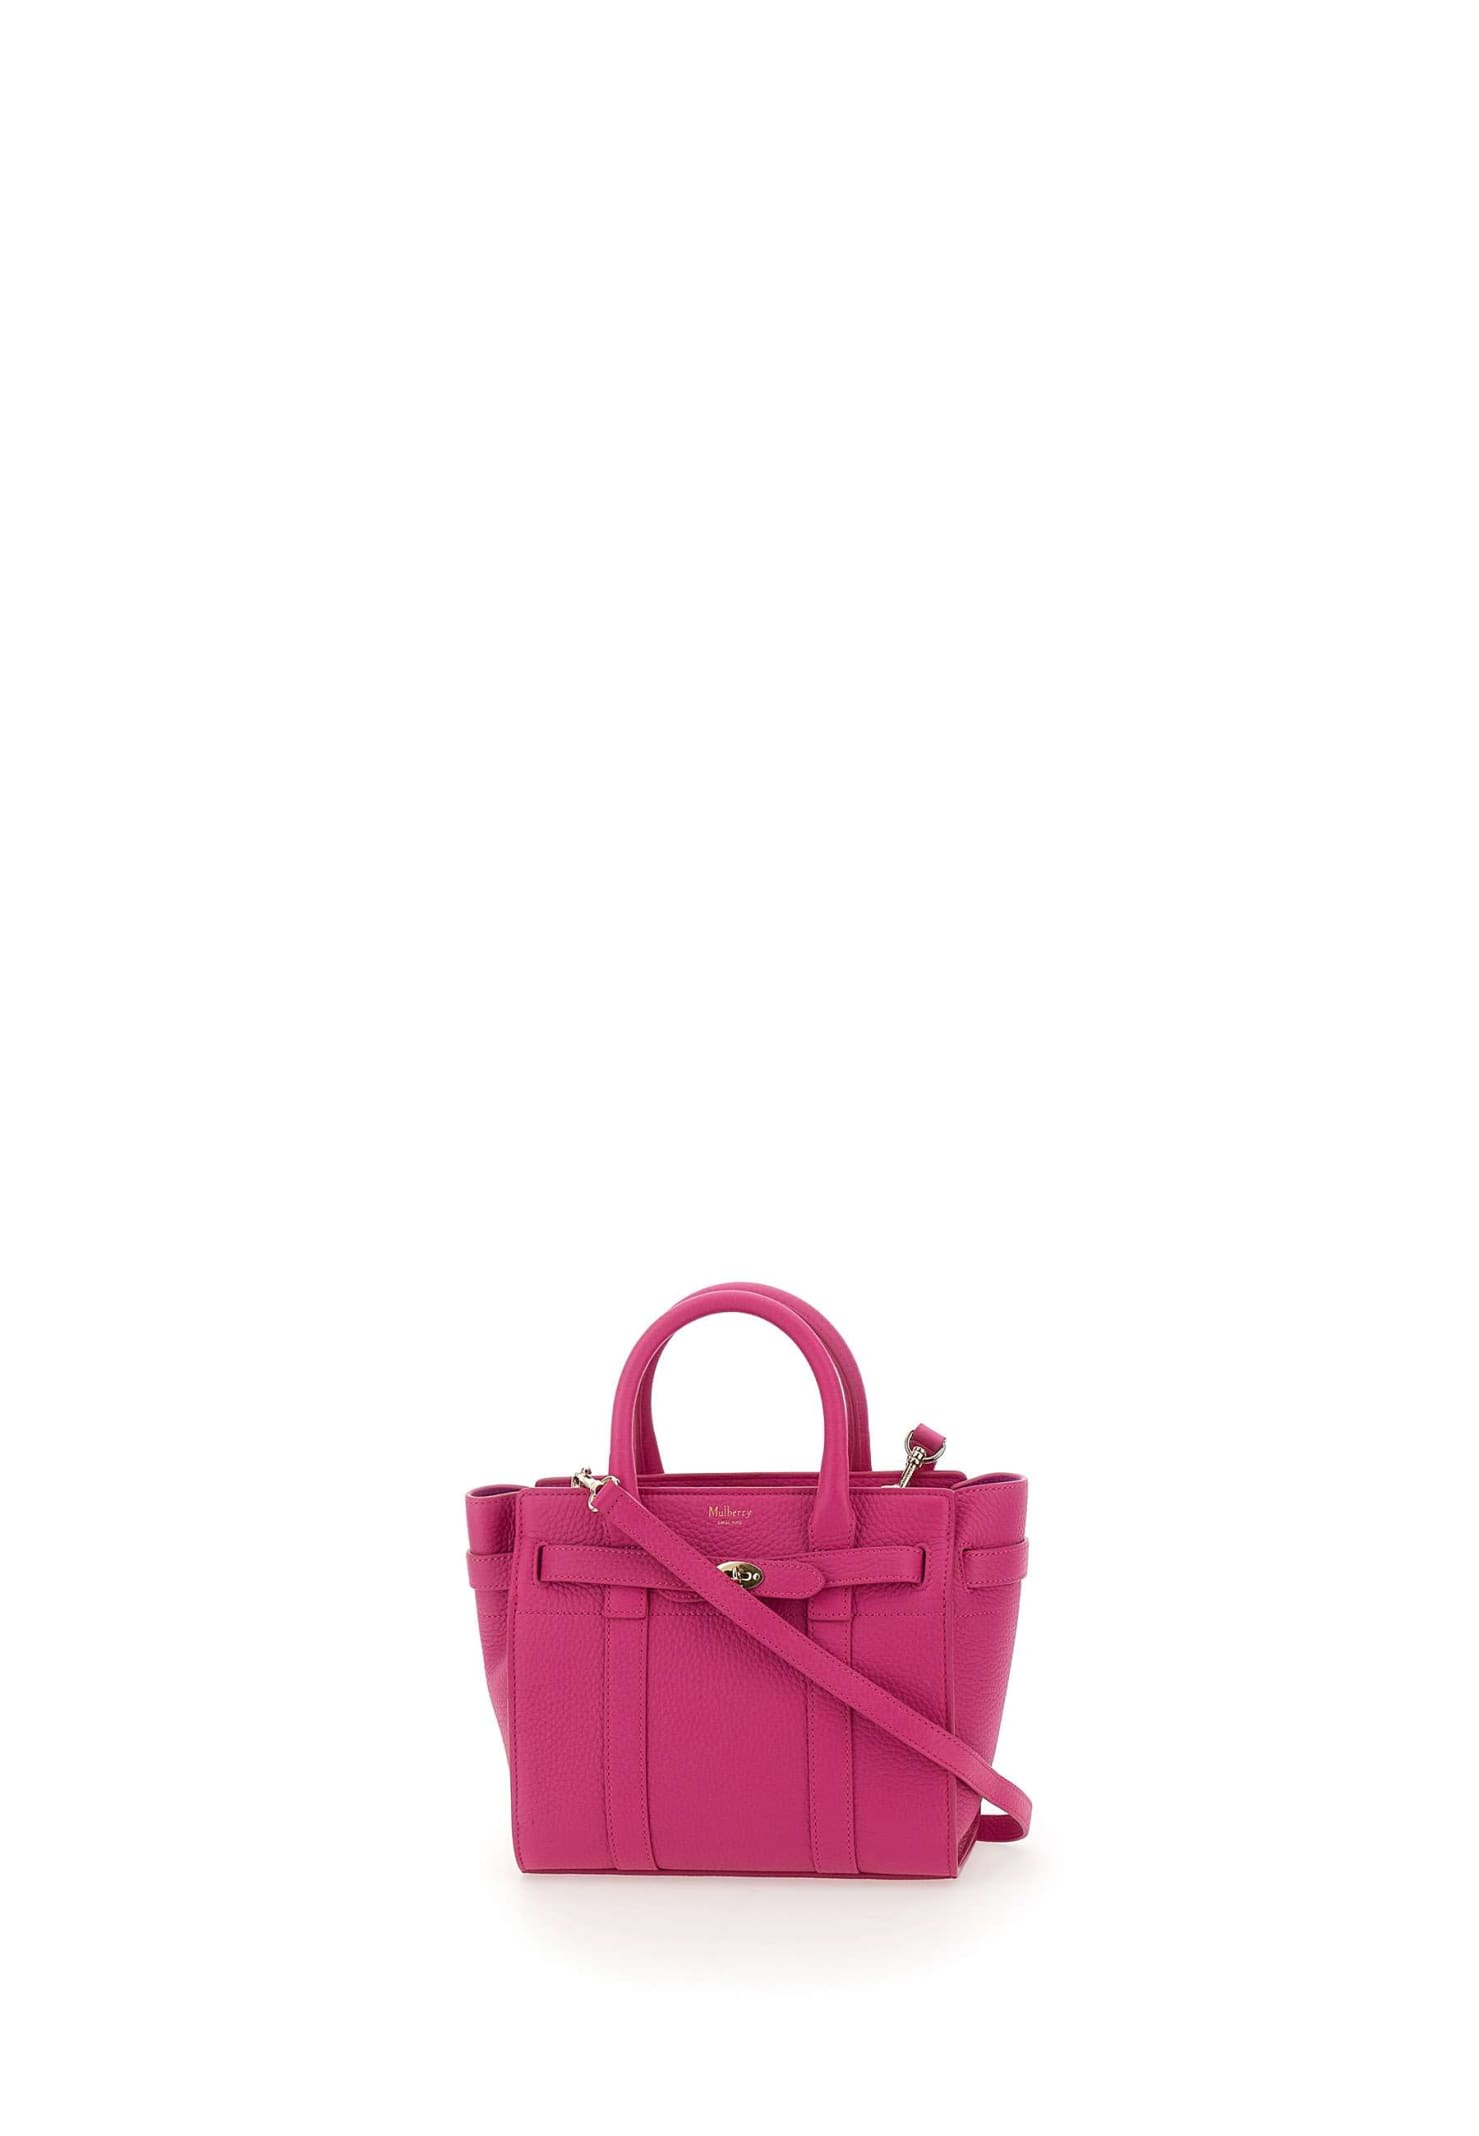 Mulberry mini Zipped Bayswater Leather Bag